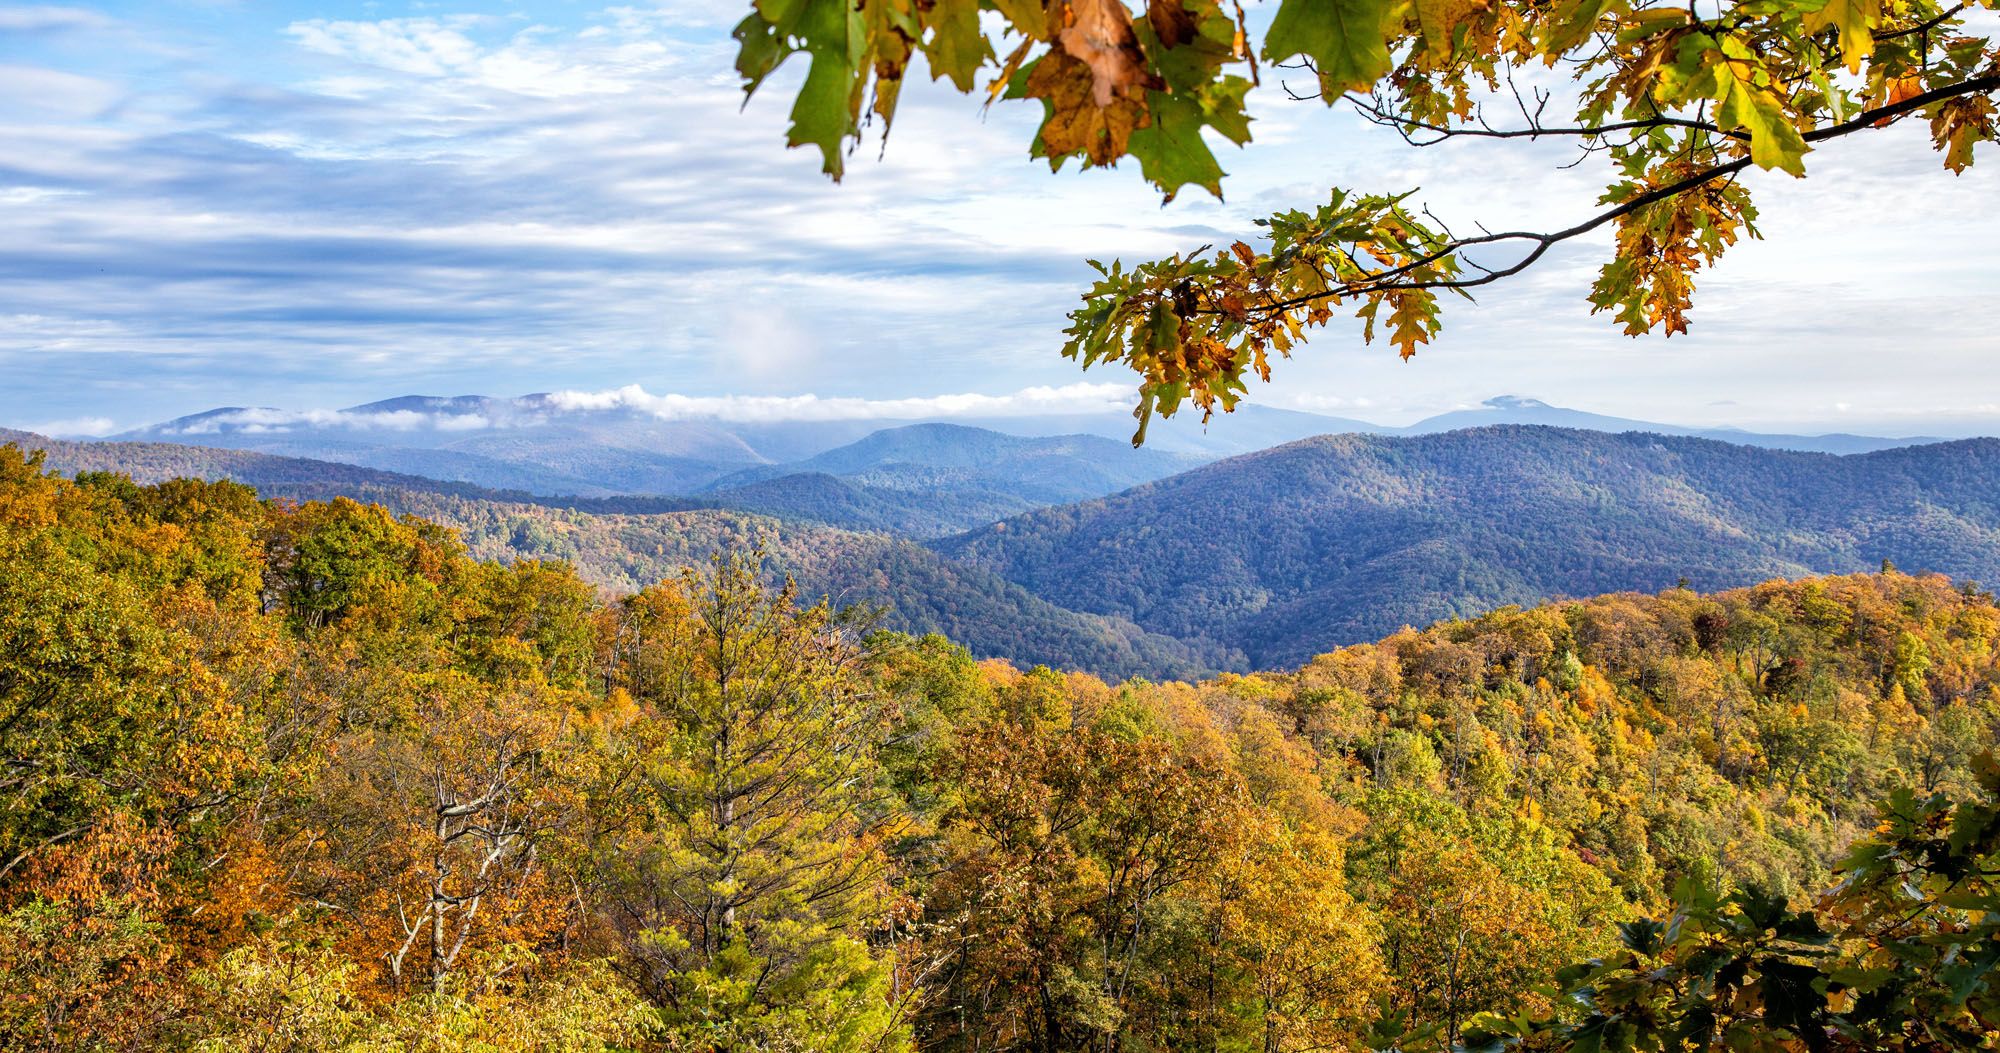 Featured image for “9 Amazing Things to Do in Shenandoah National Park”